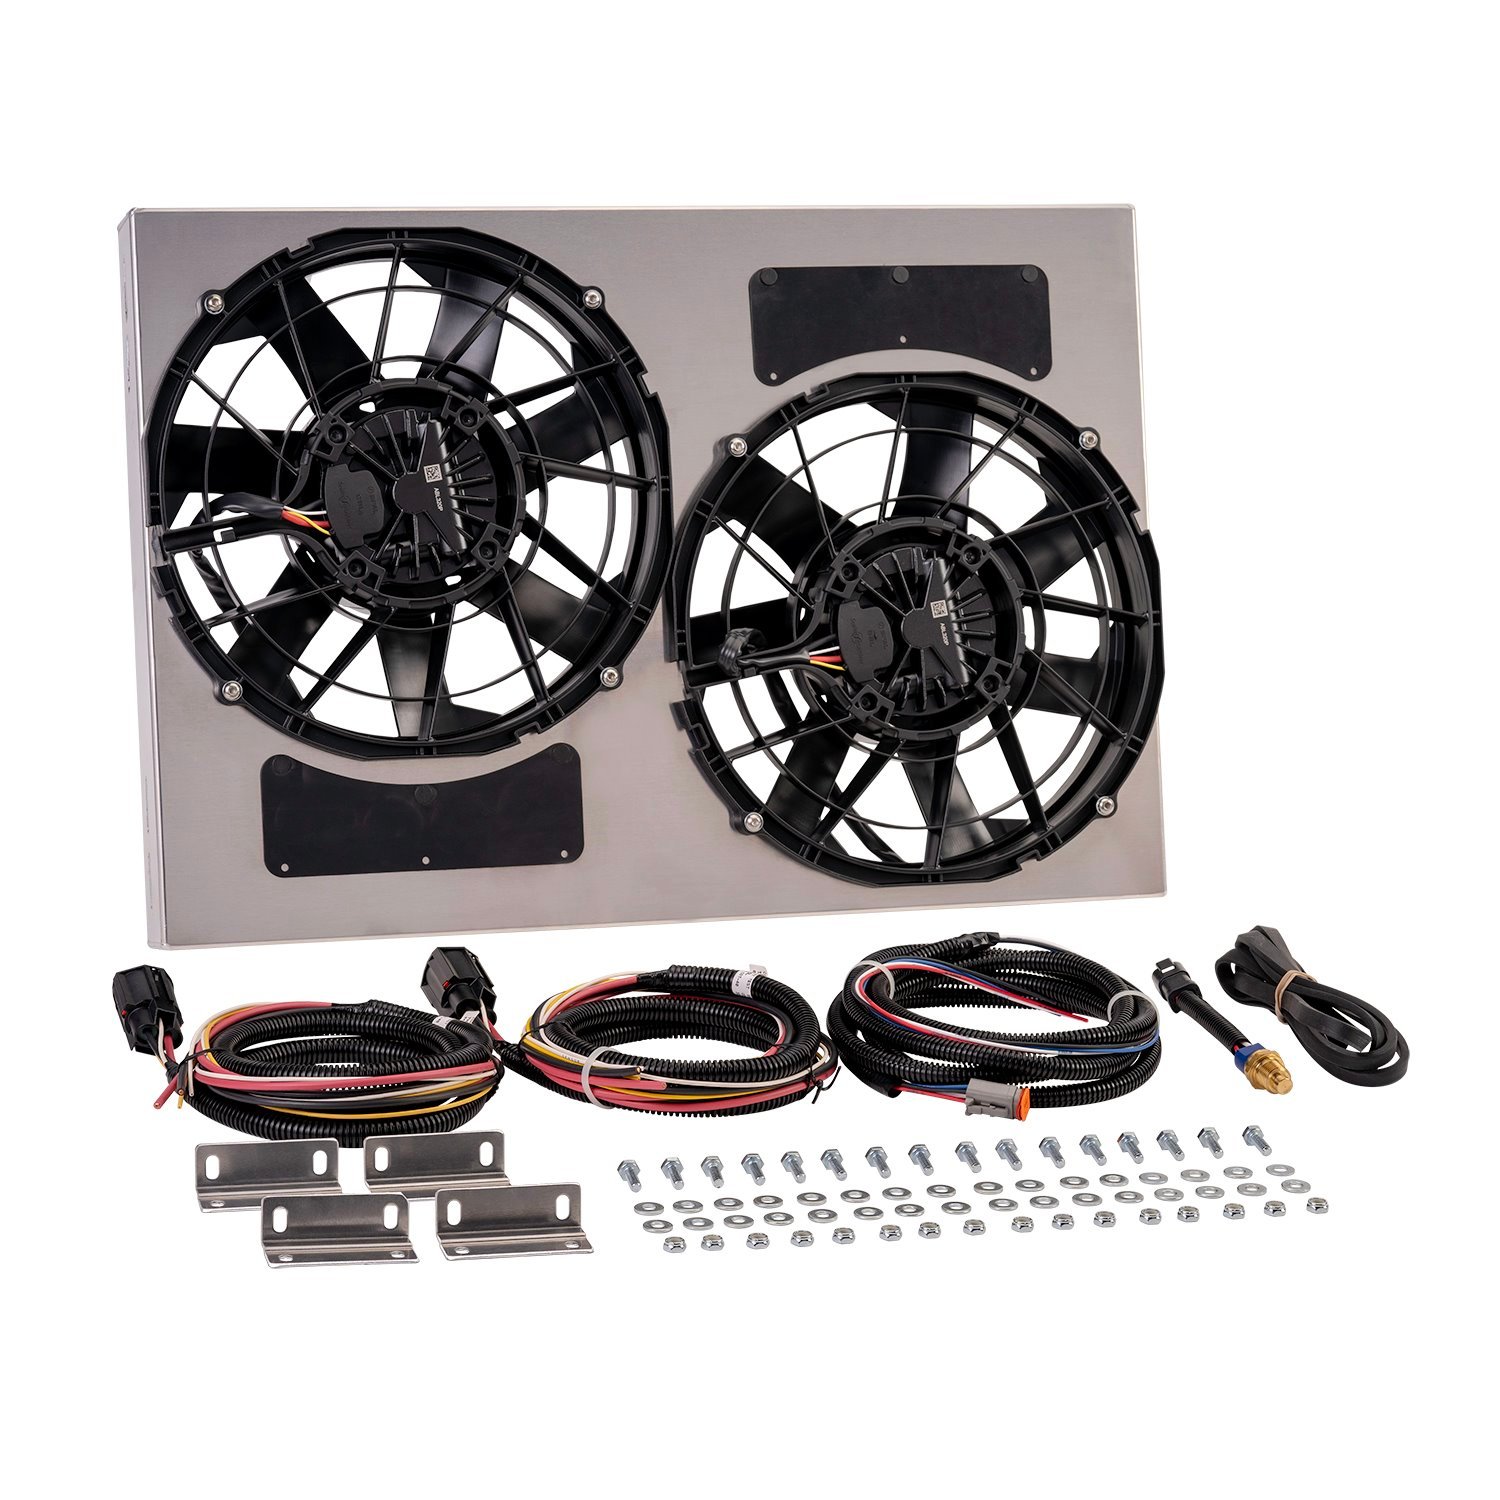 67926-215 Brushless Dual Powerpack 12 in. Radiator Fan Assembly with Integrated 215 Degree PWM Controller